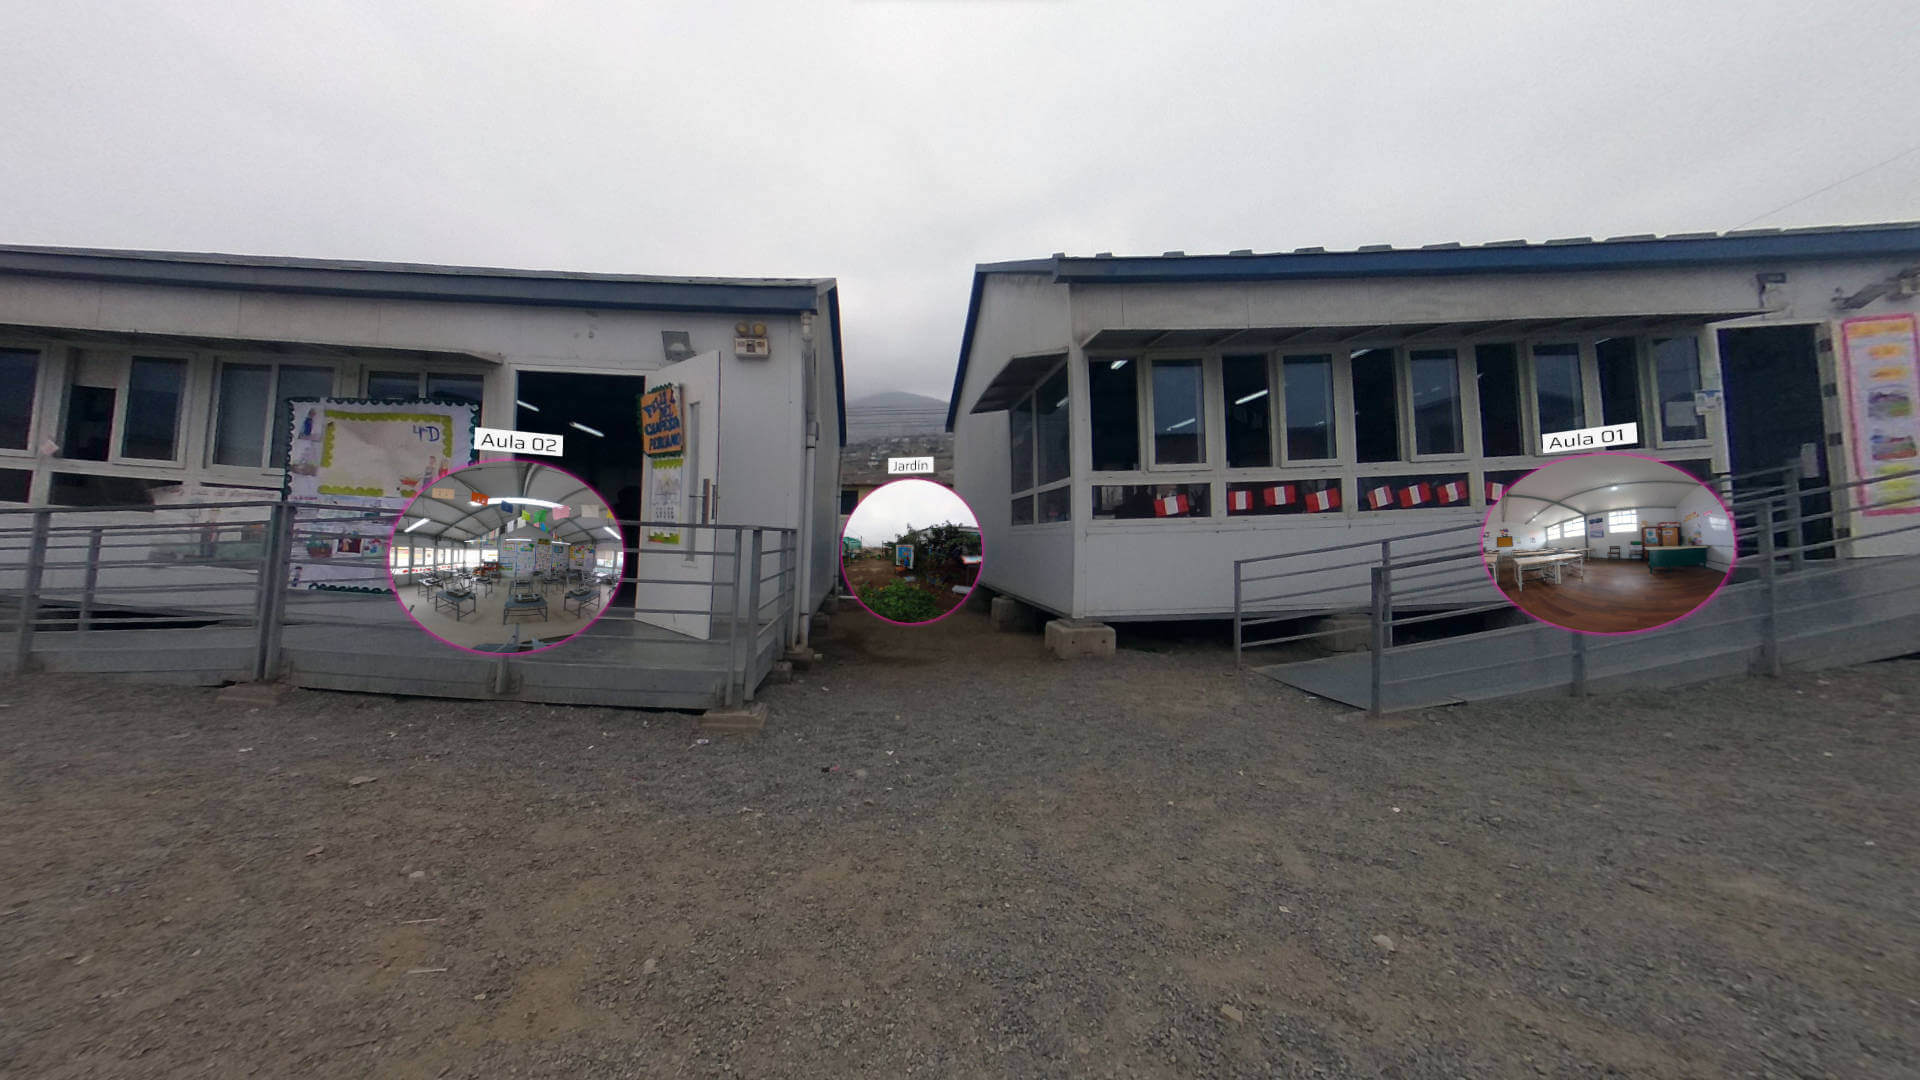 A still image of a scene in the metaverse, it shows two prefabricated classrooms and portals leading to these classrooms' scenes 